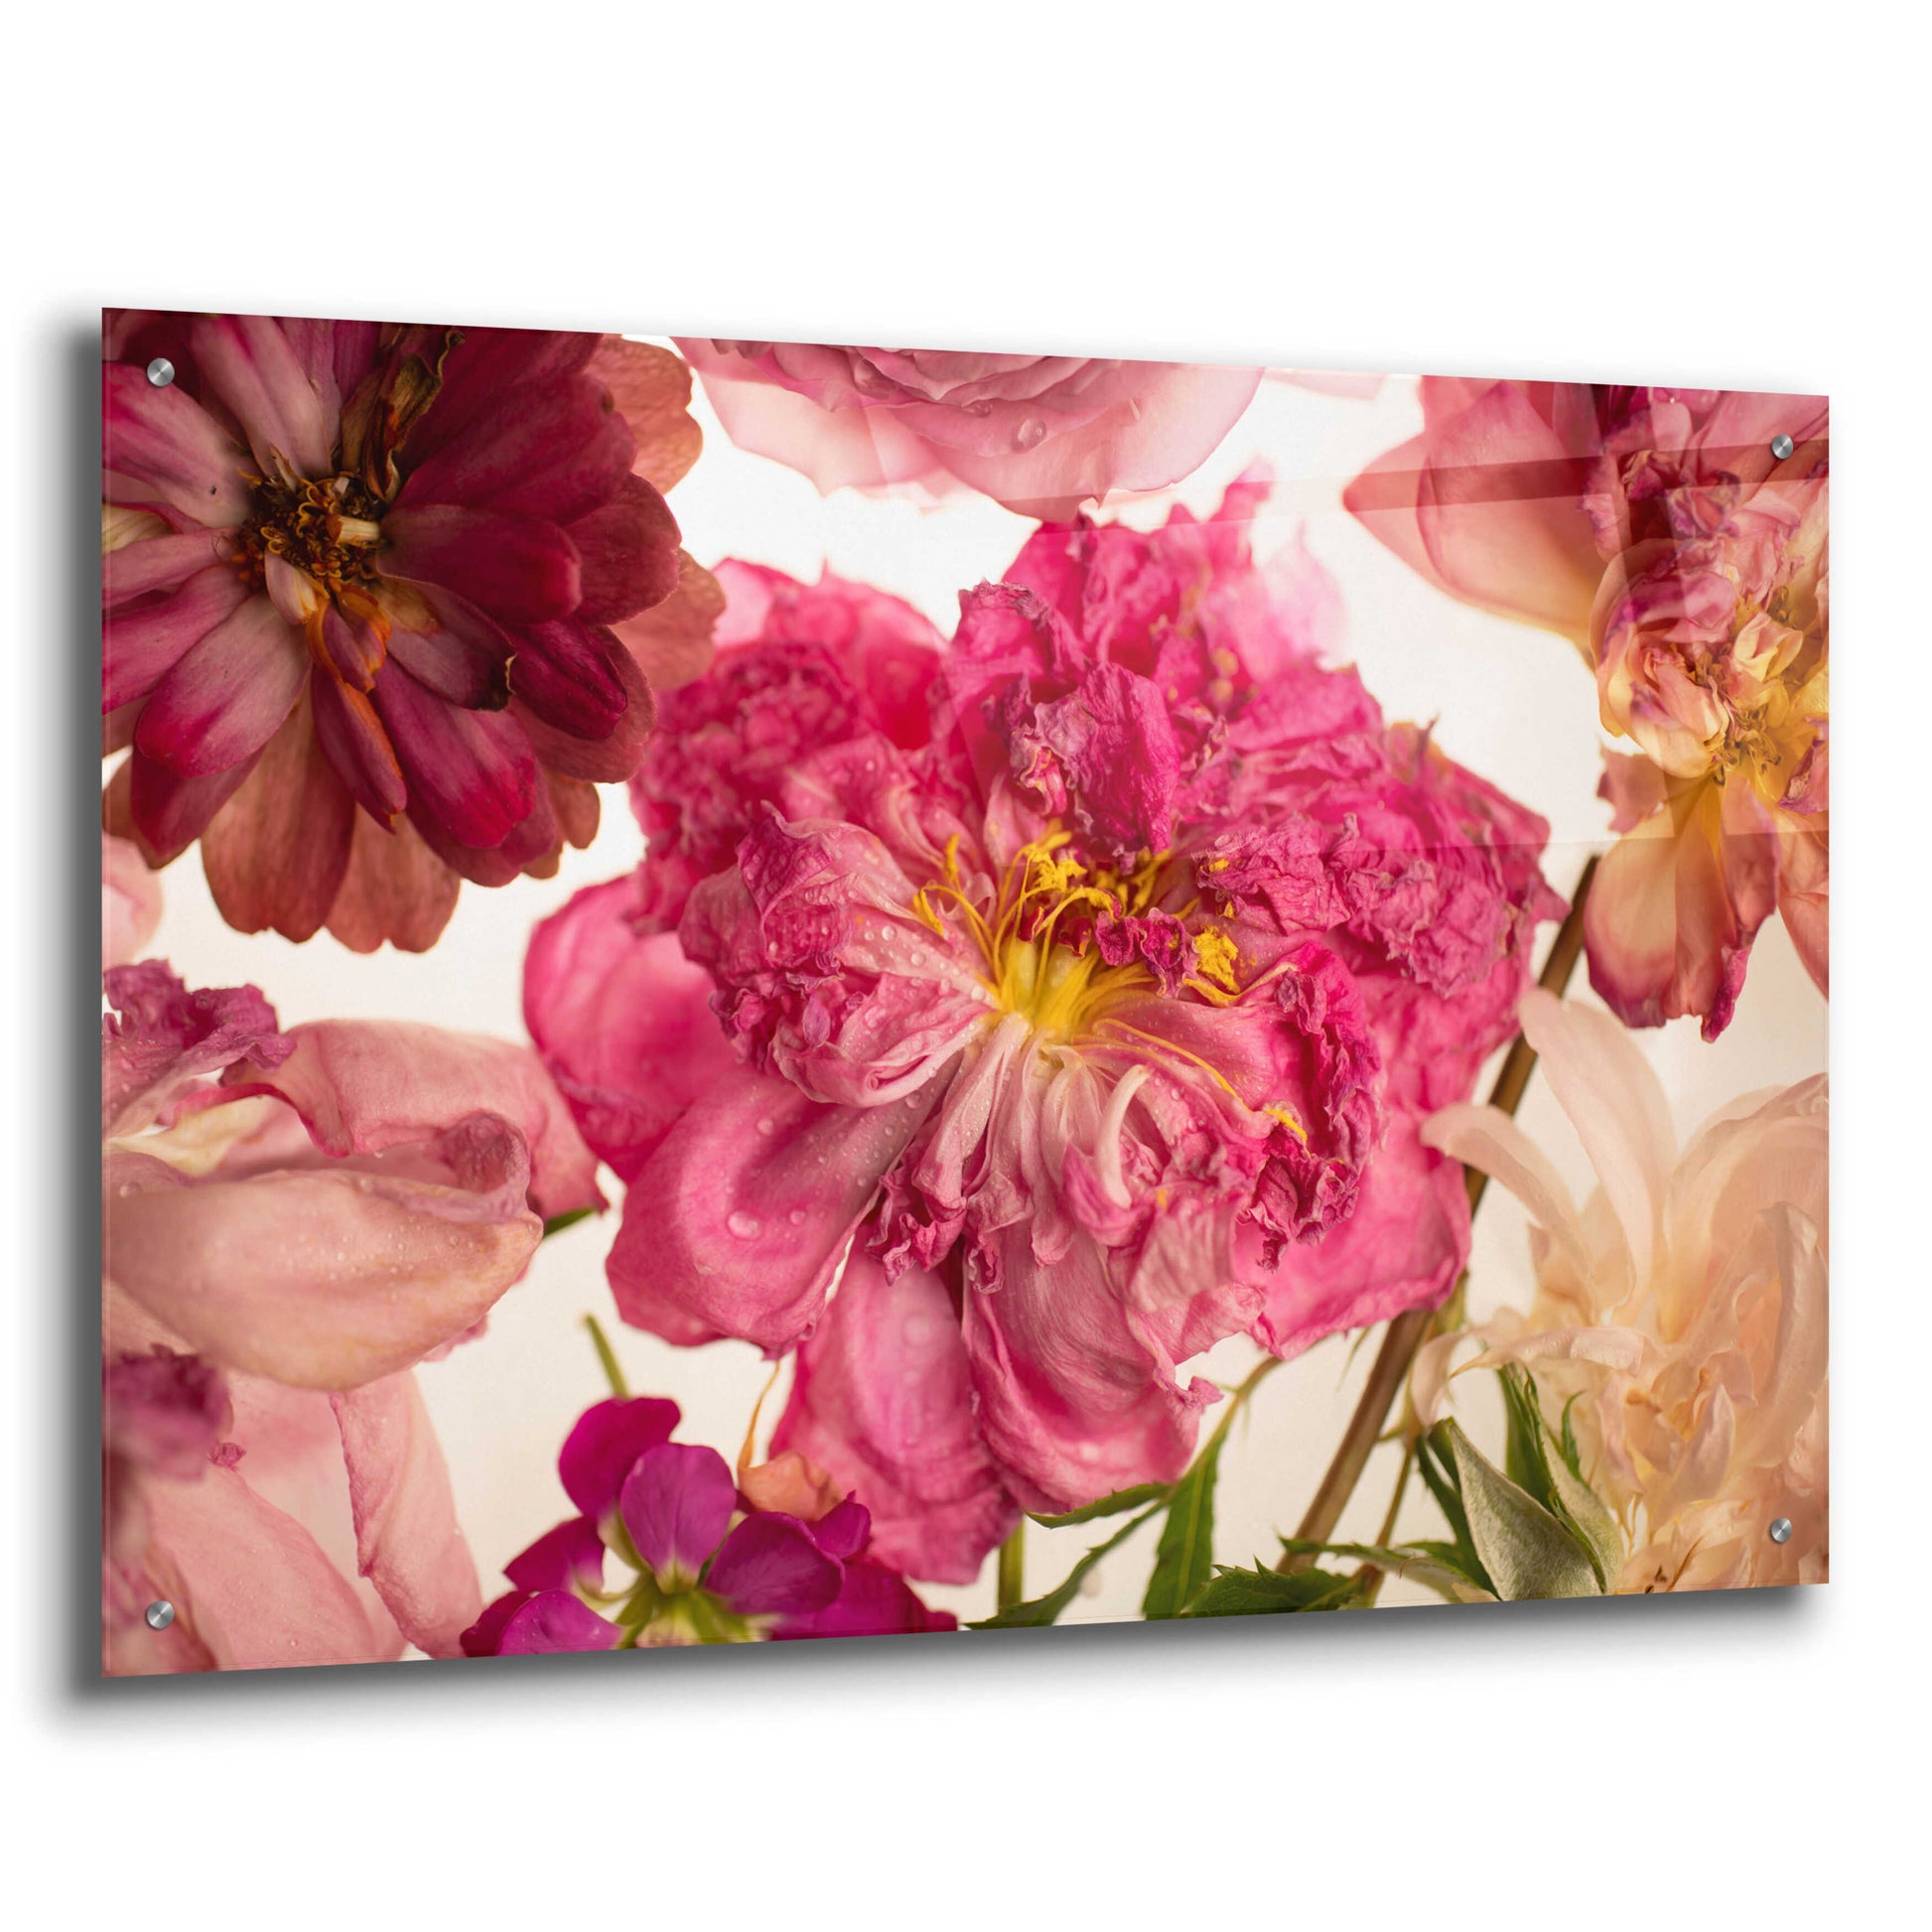 Epic Art 'Peony on White' by Leah McLean, Acrylic Glass Wall Art,36x24